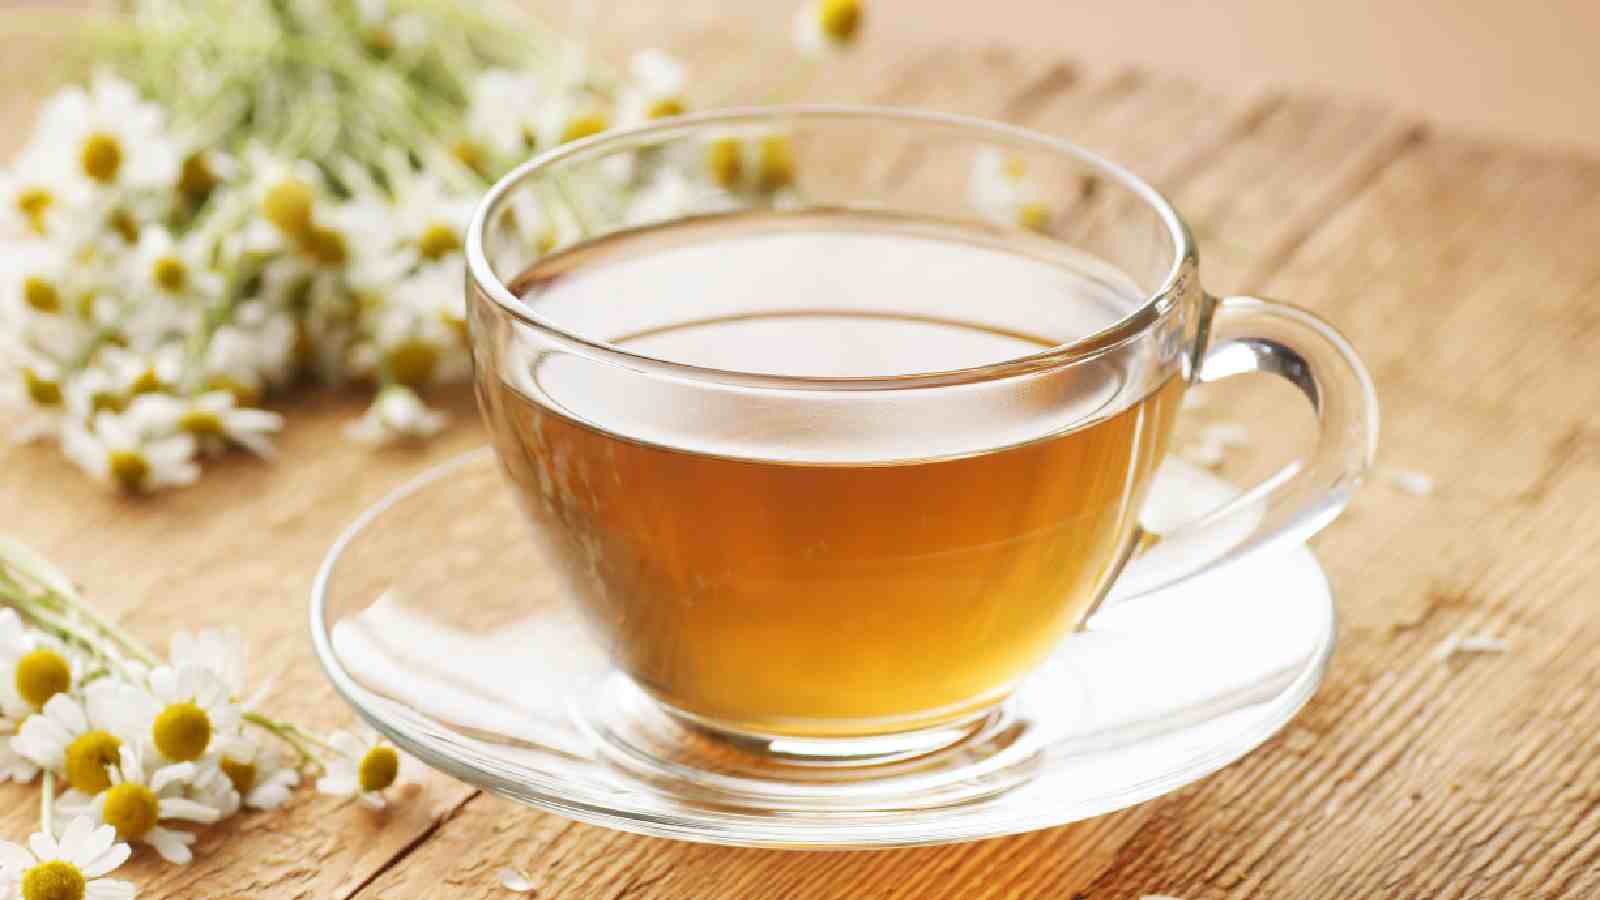 Chamomile tea for sleep: 5 best options to relieve stress and improve sleep quality